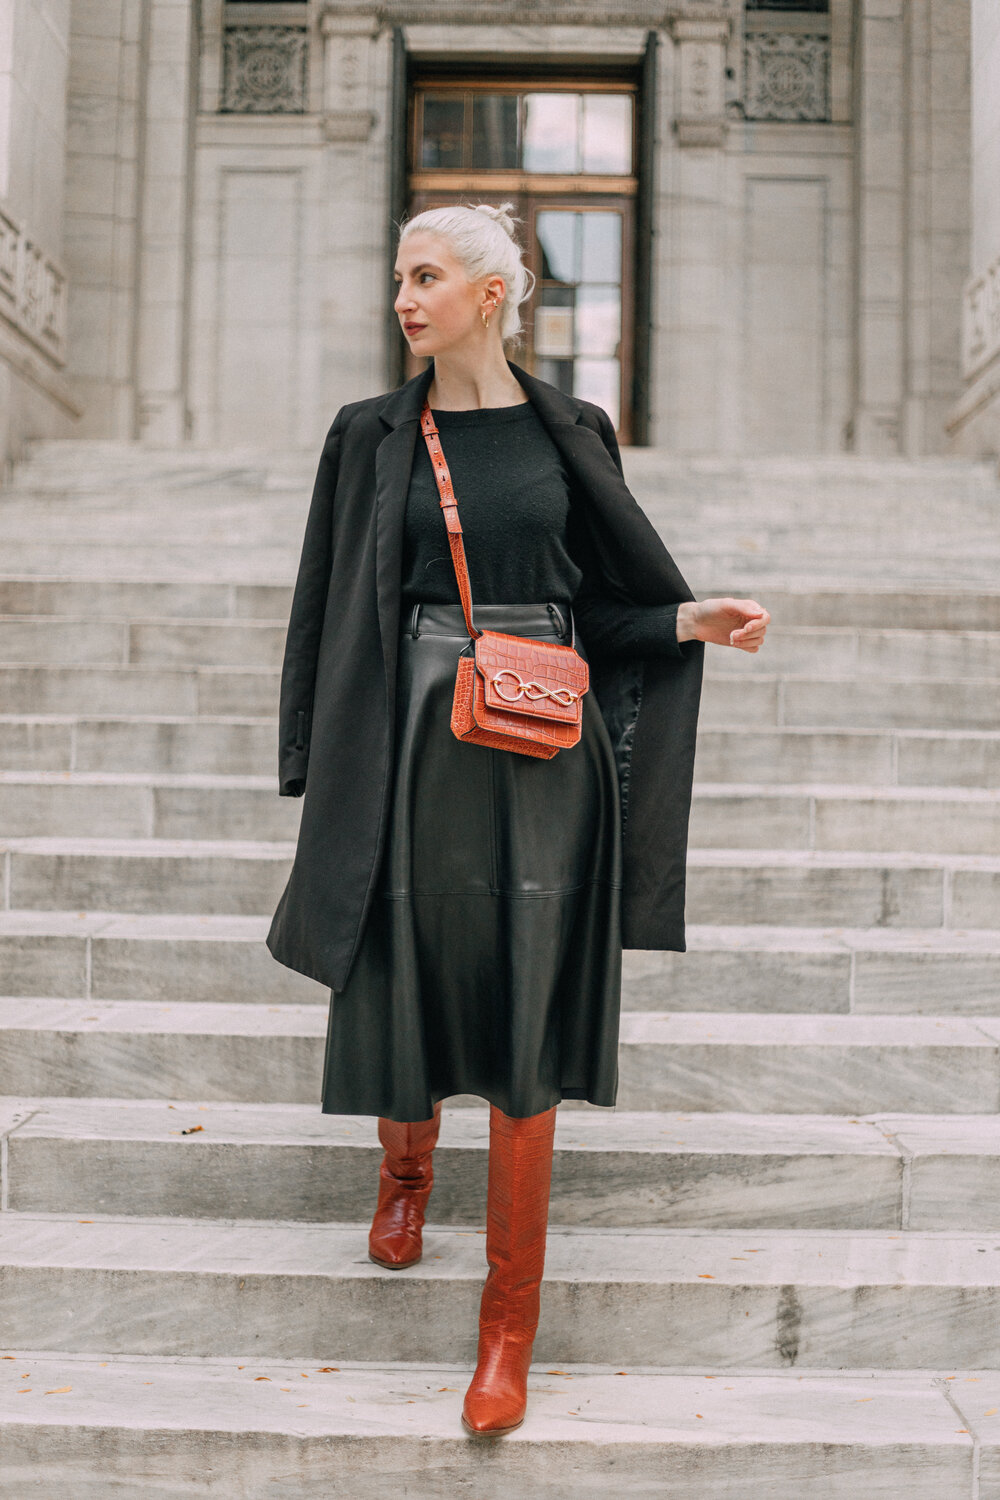 Midi Skirts & Boots — Southern New Yorker